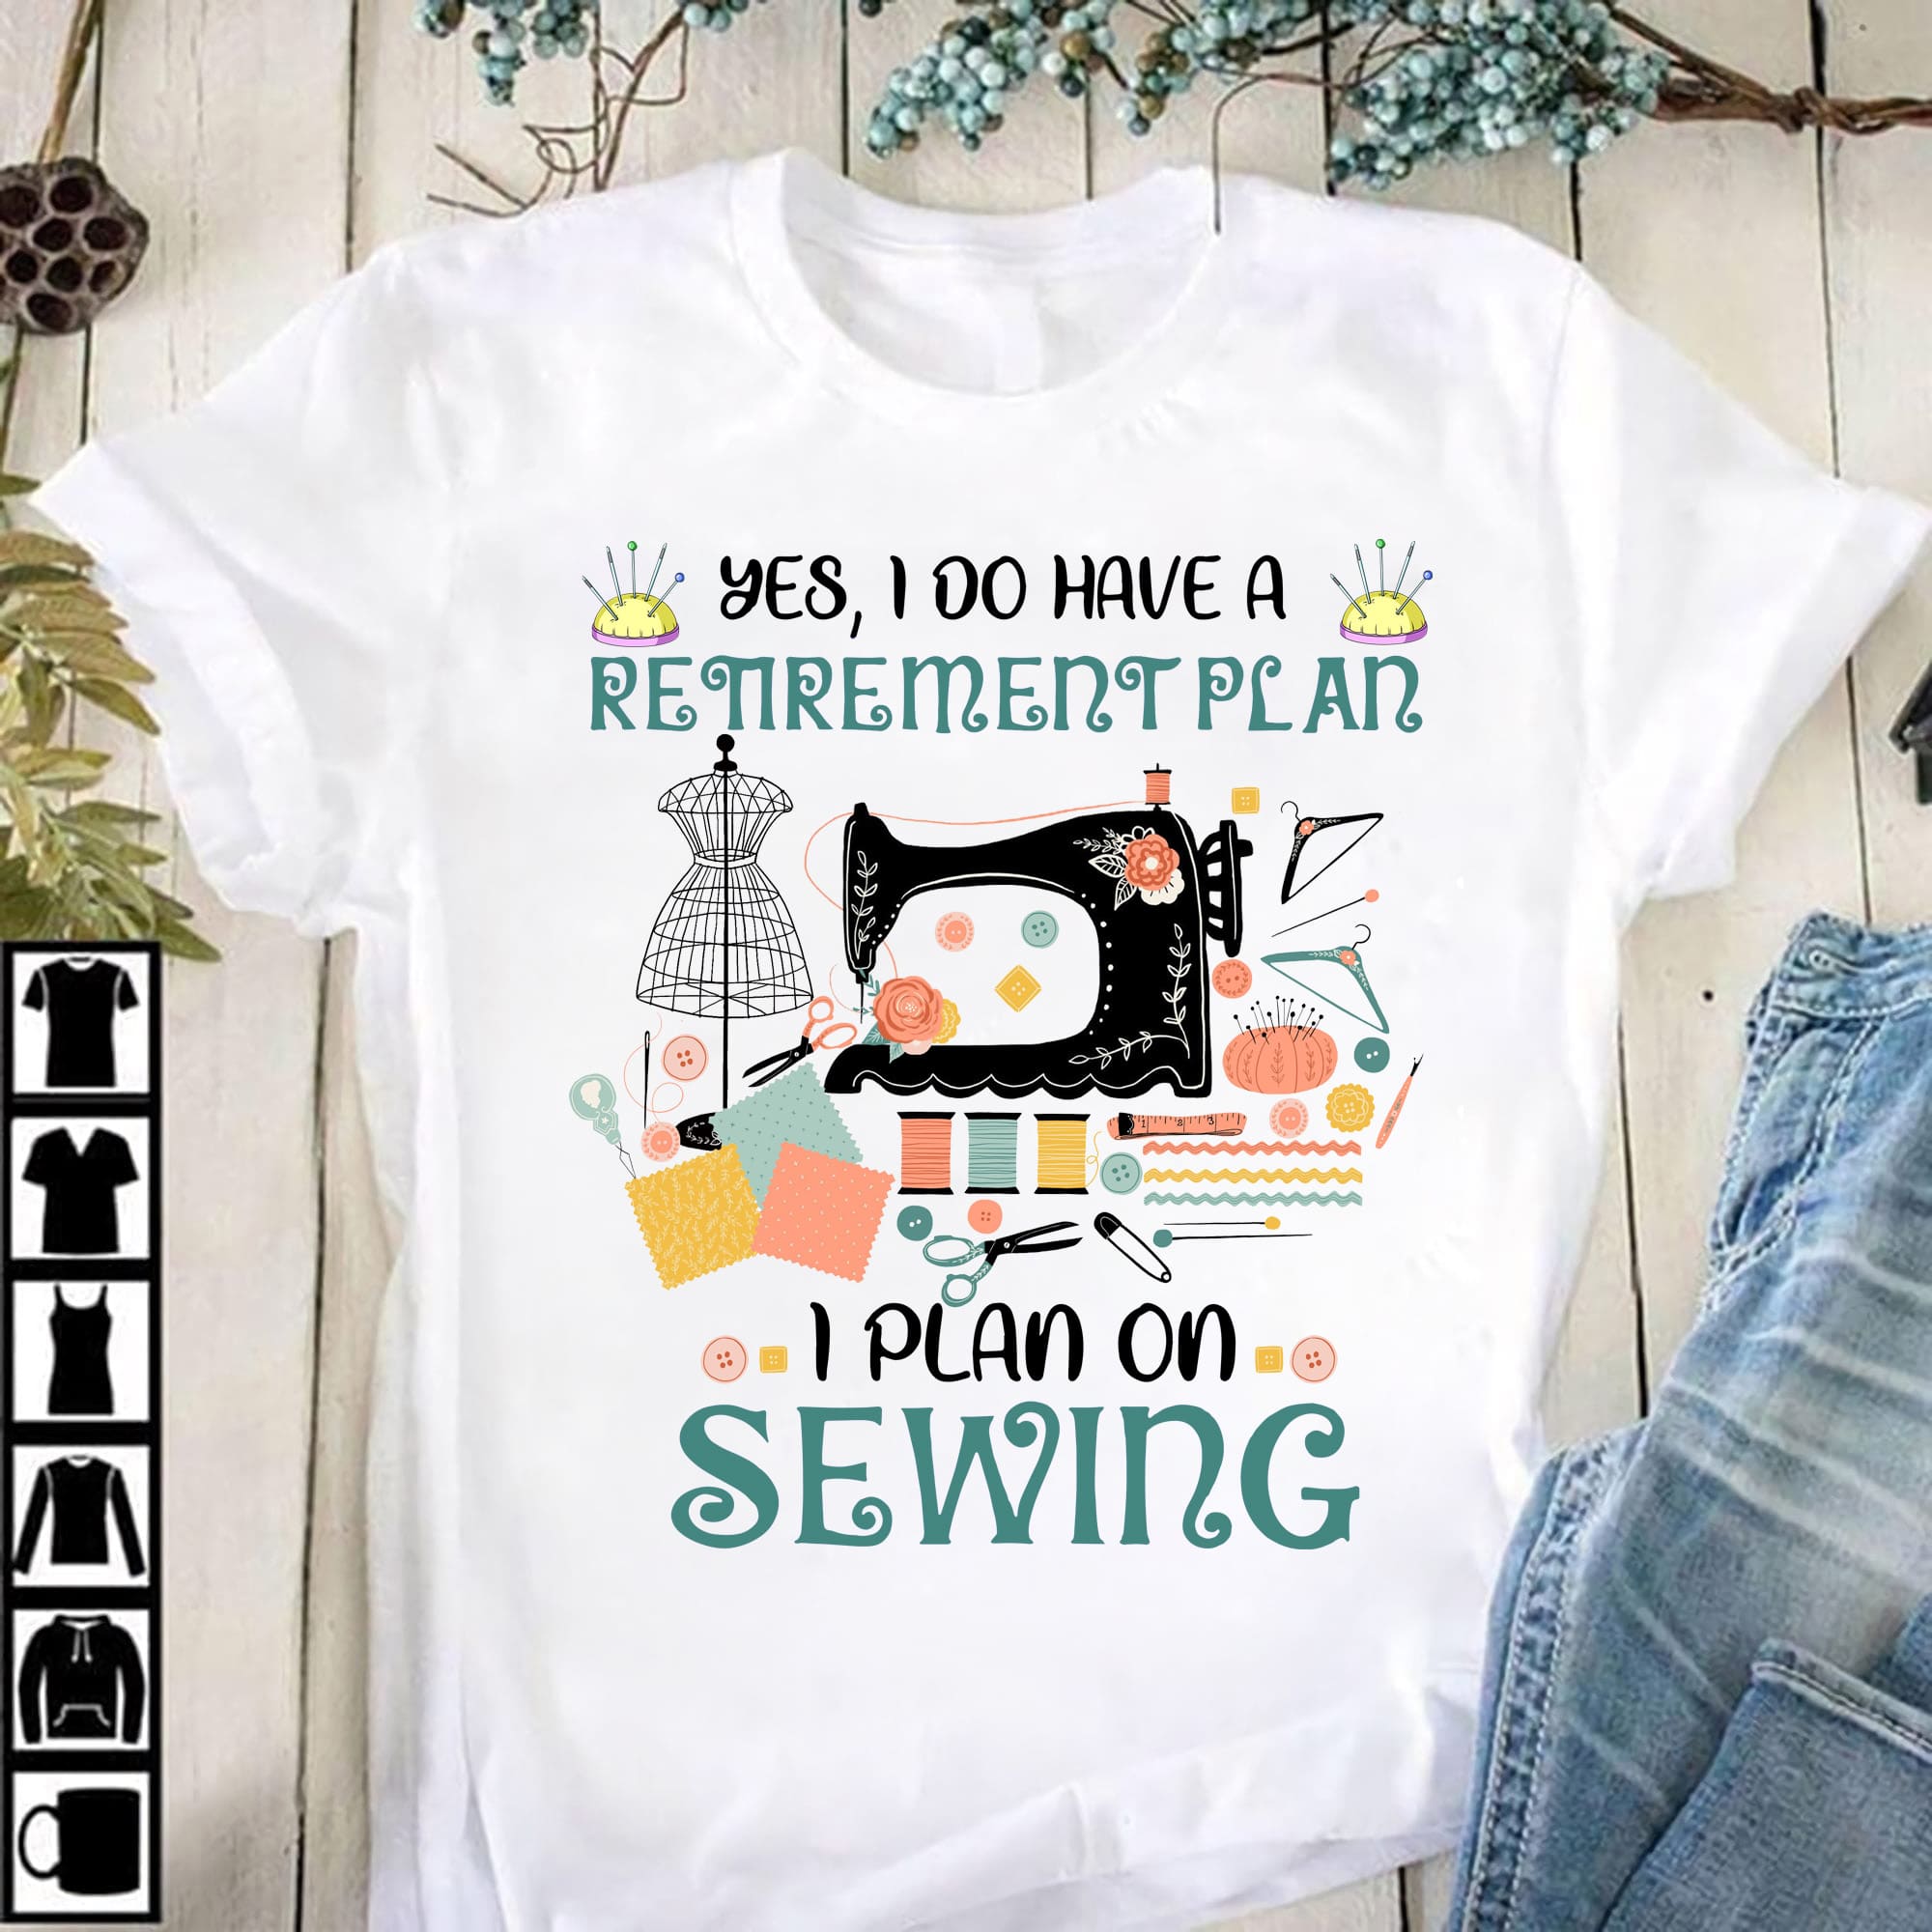 Yes. I do have a retirement plan I plan on sewing - Retired people loves sewing, black sewing machine